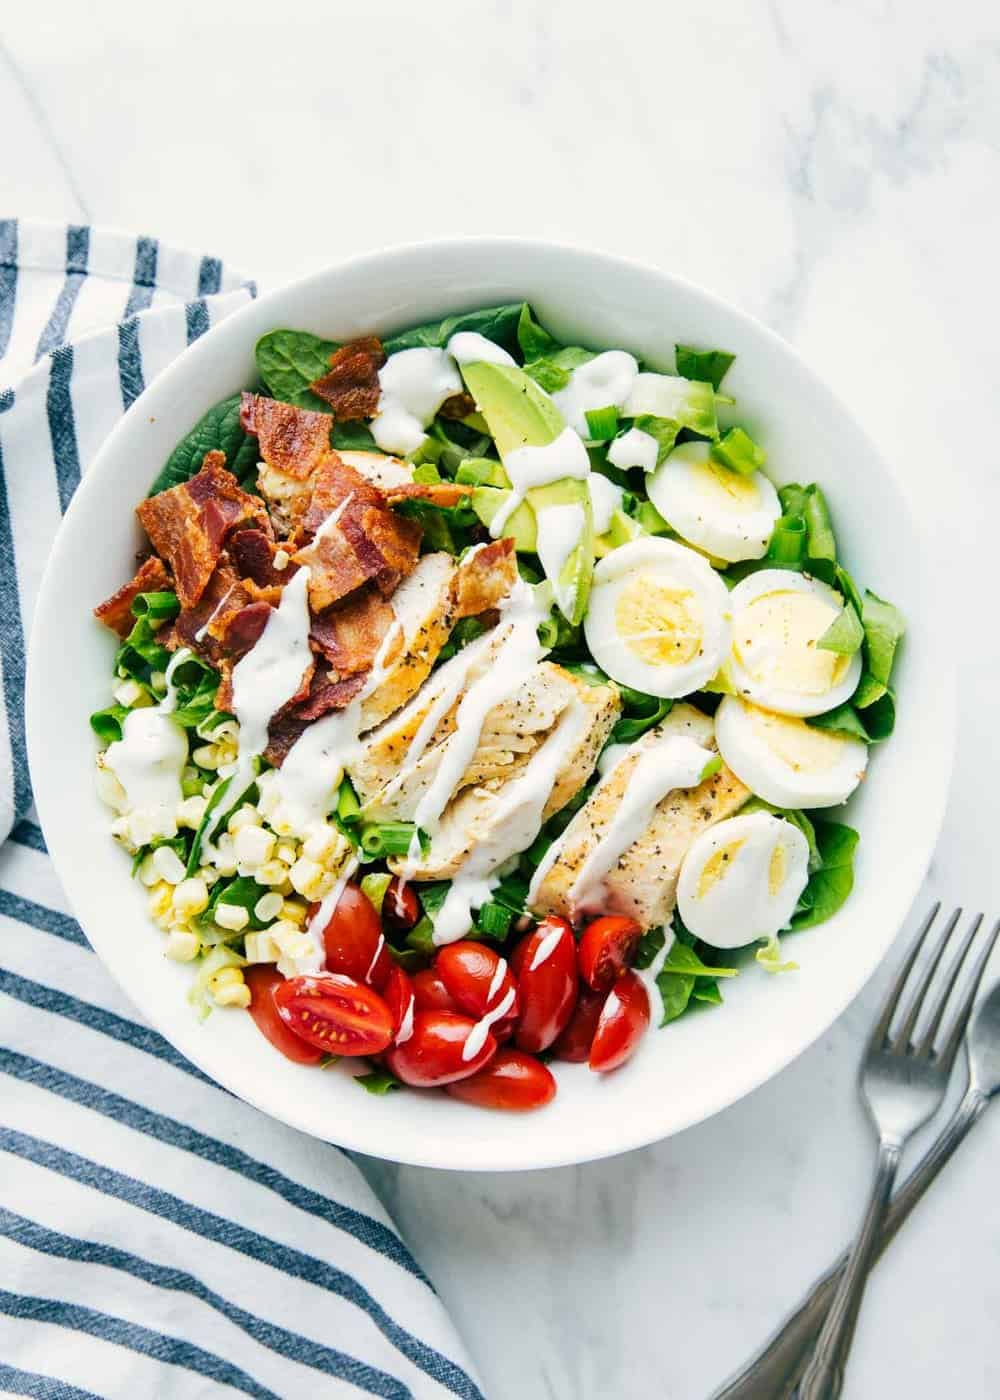 Cobb salad drizzled with homemade ranch dressing.